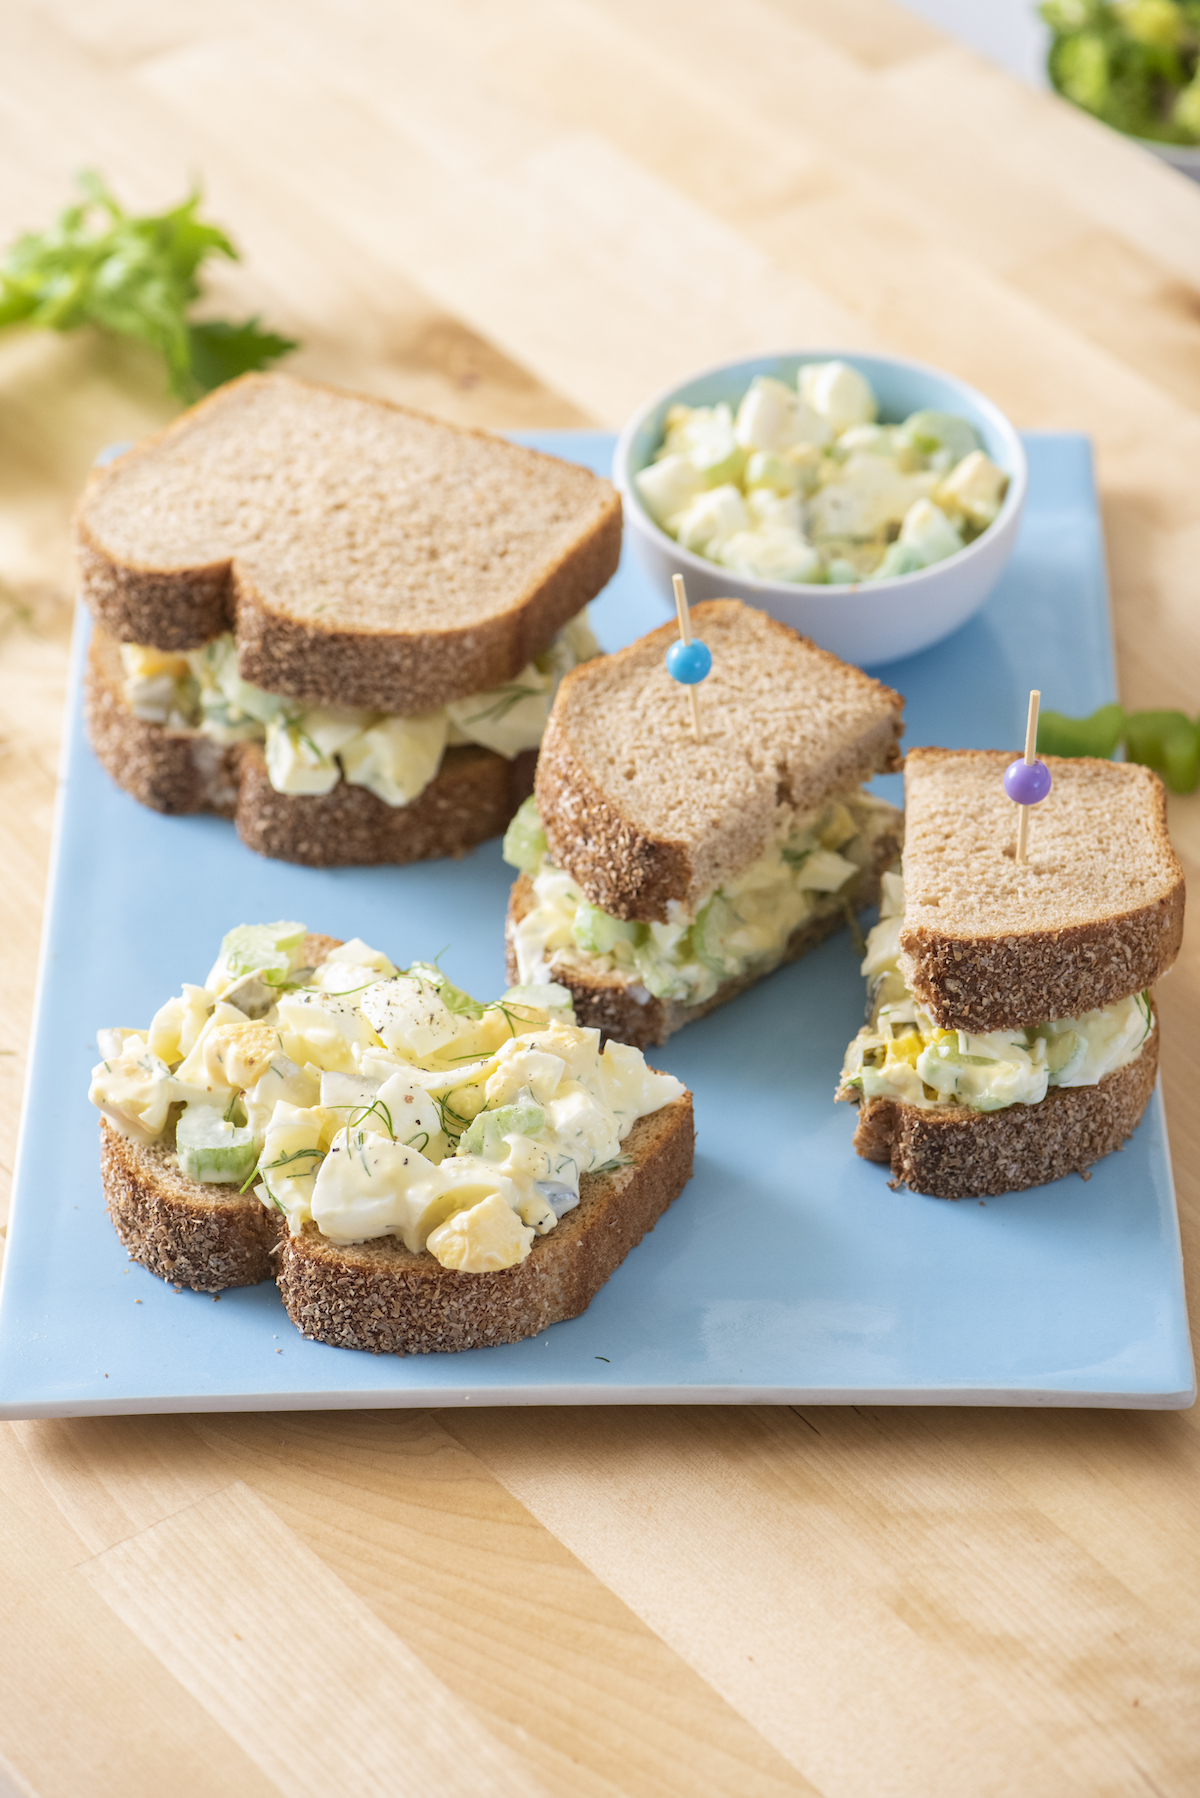 Three egg salad sandwiches on serving tray.